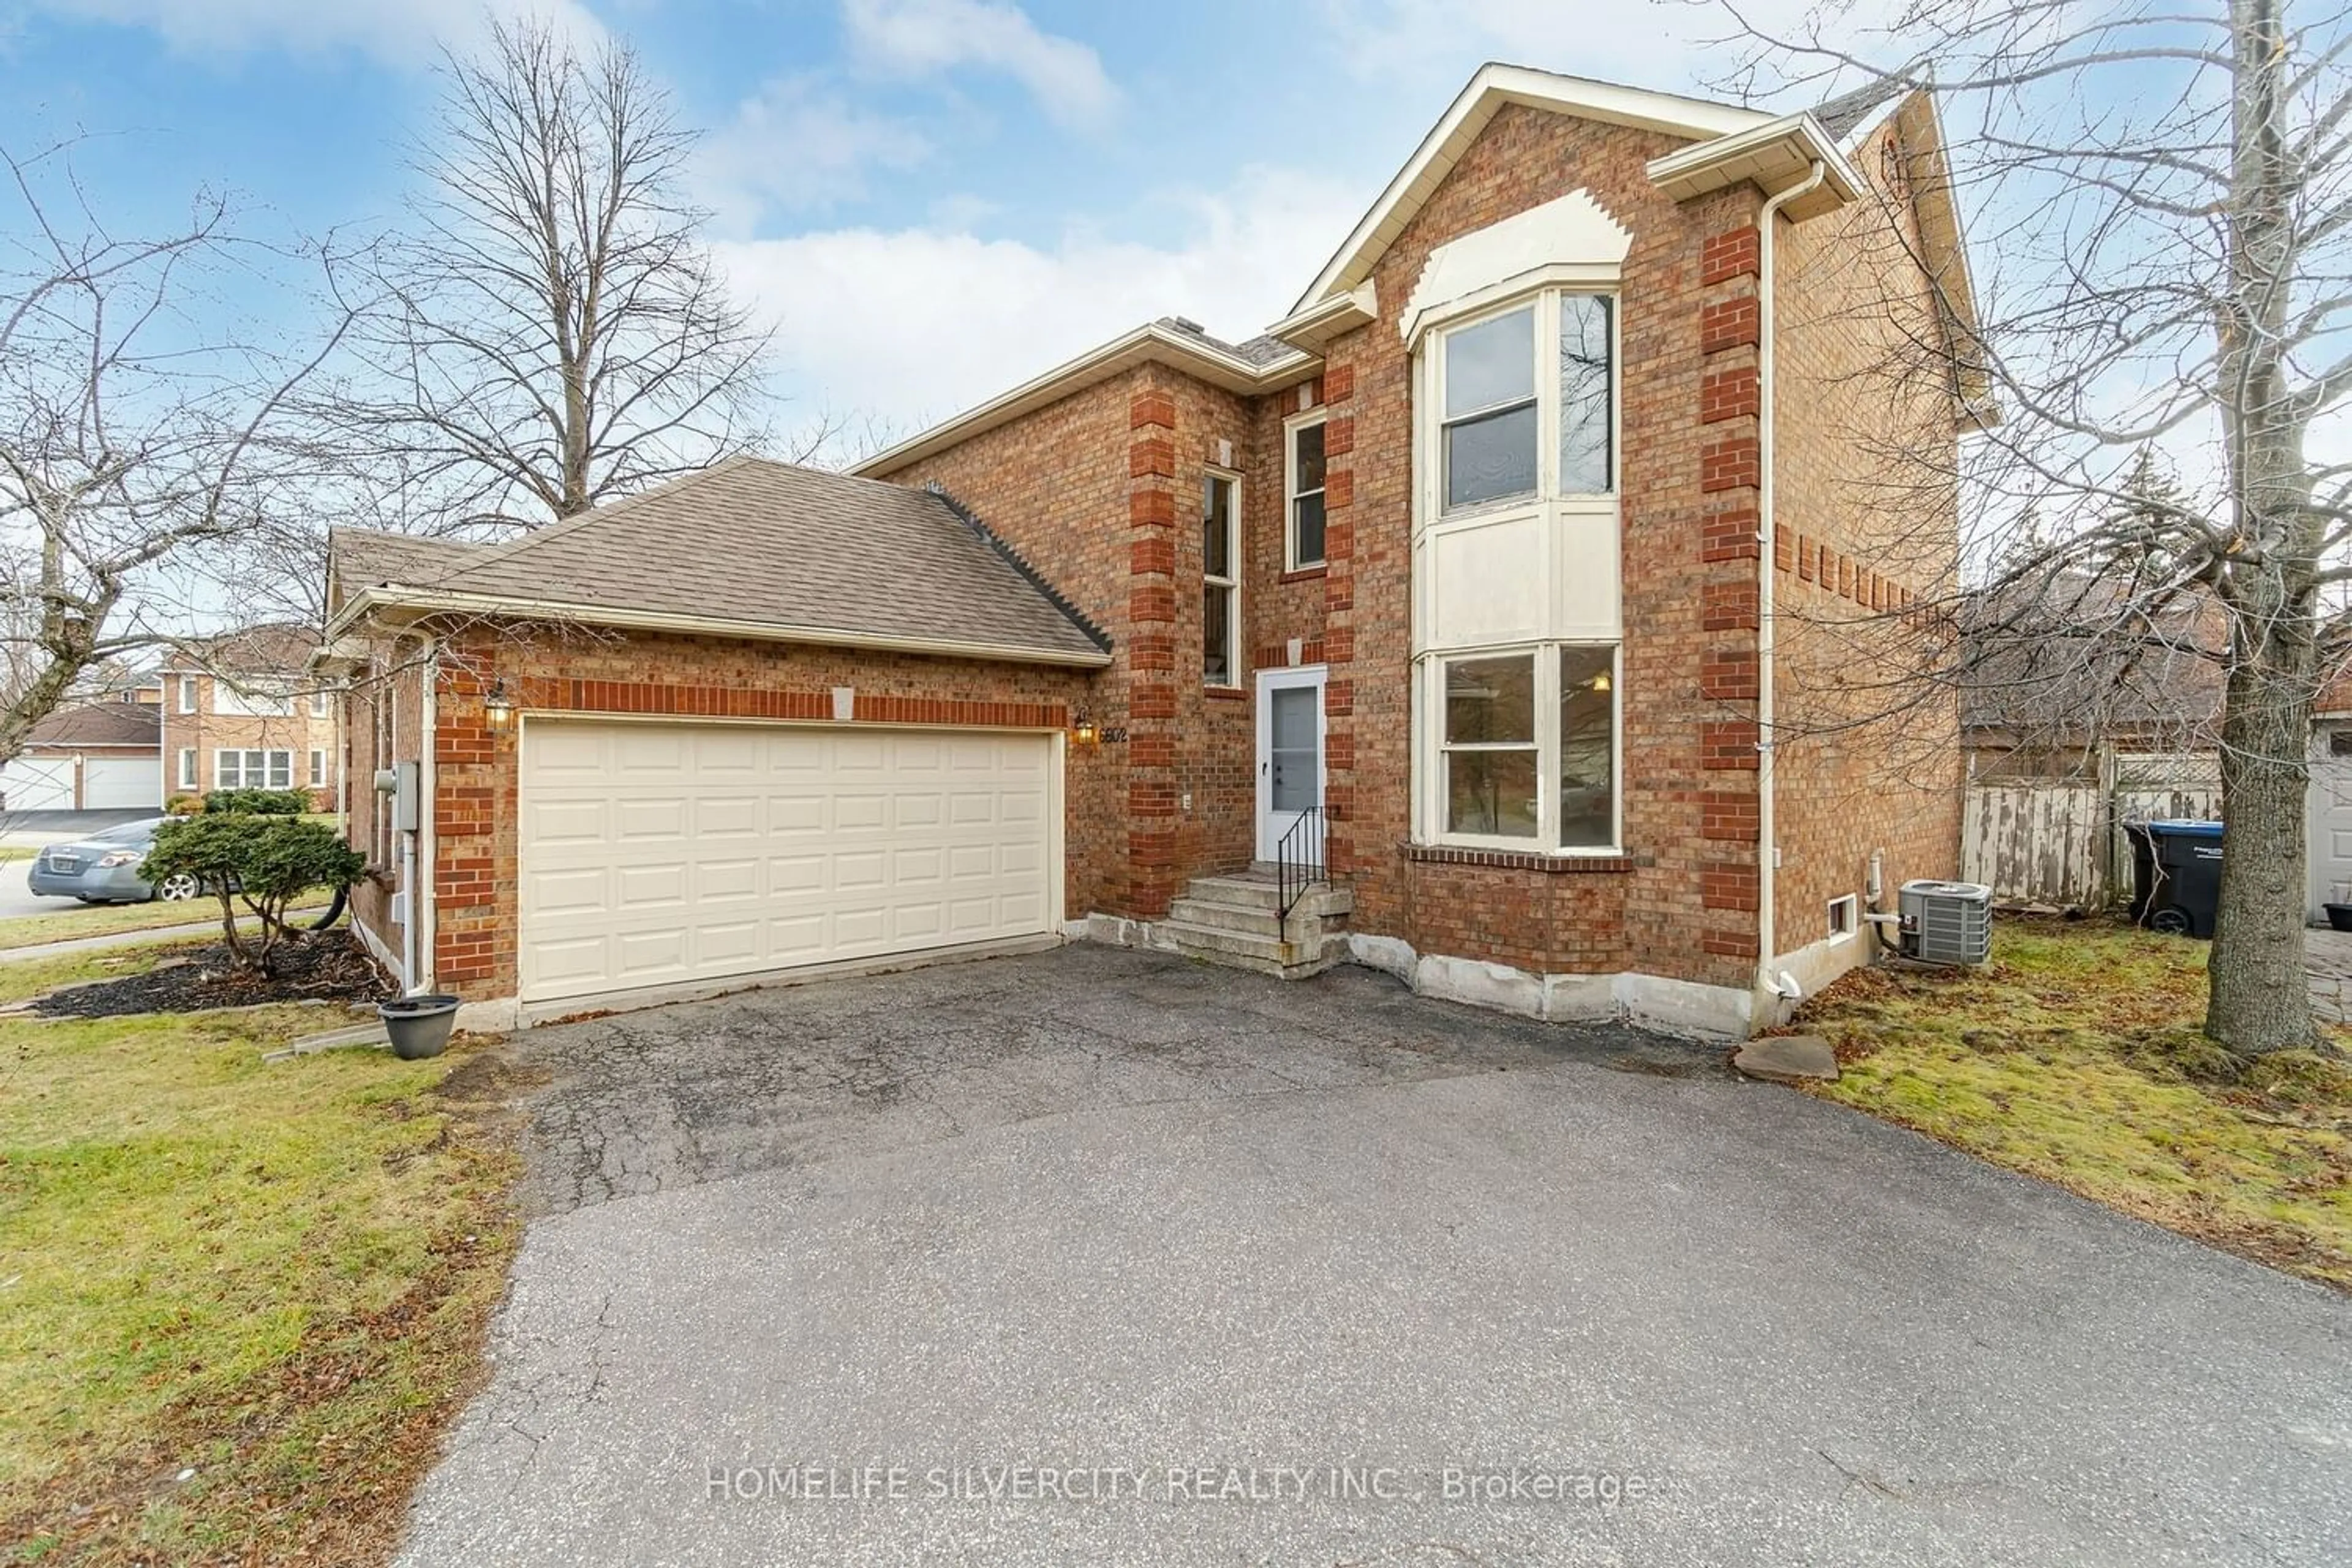 Home with brick exterior material for 6602 Snow Goose Lane, Mississauga Ontario L5N 5H5